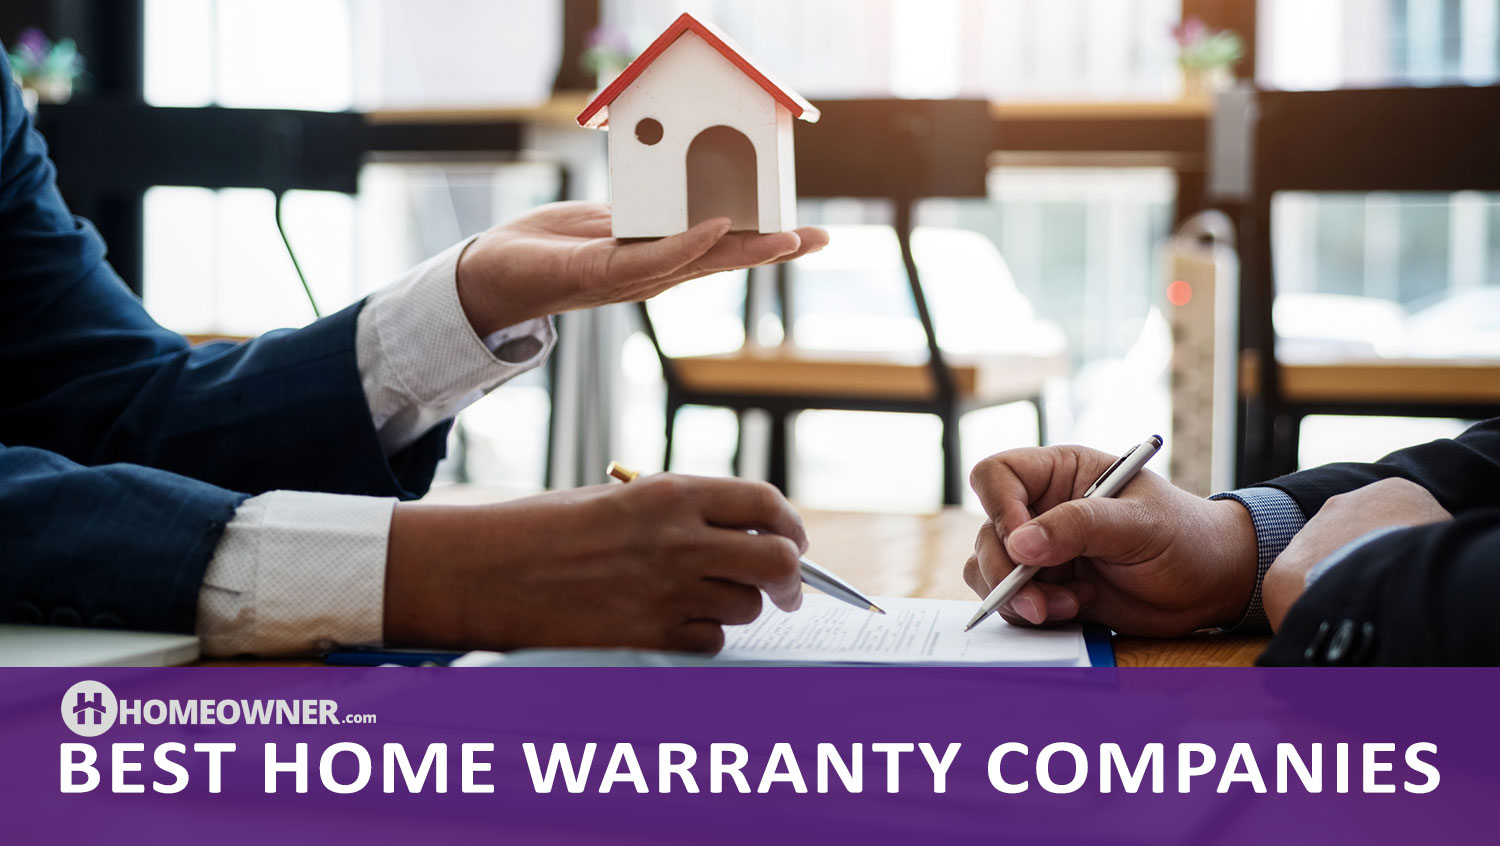 Best Home Warranty Companies for Homeowners